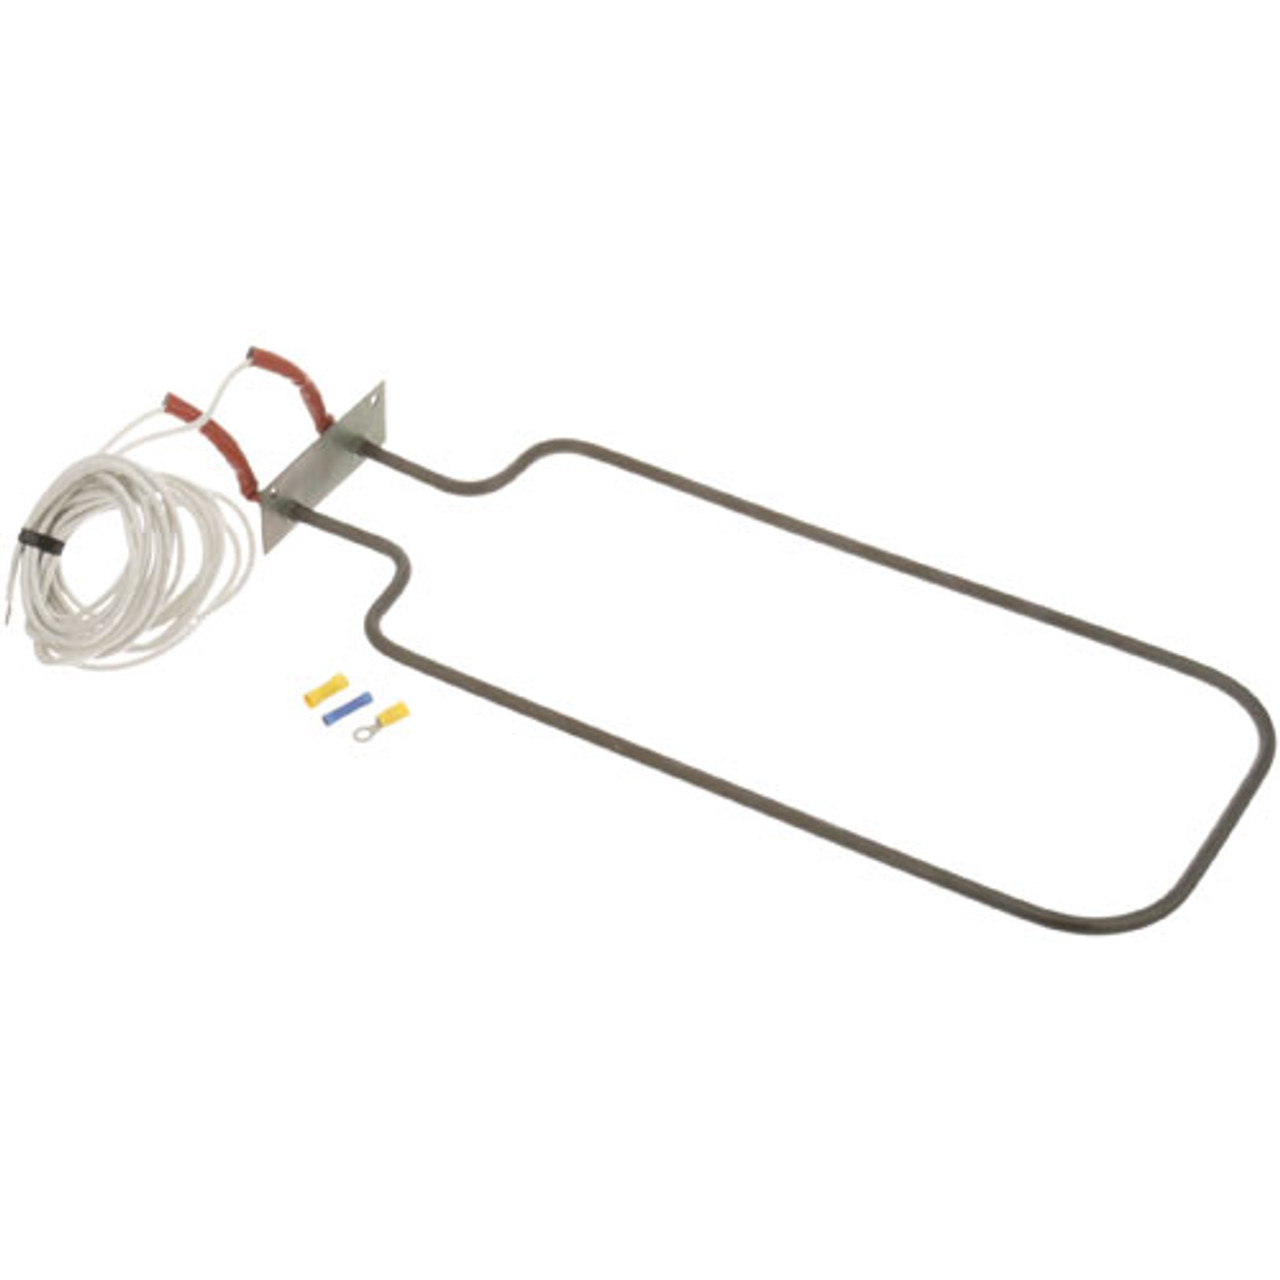 Heating Element - 120V/1Kw - Replacement Part For Wittco WP-105-3